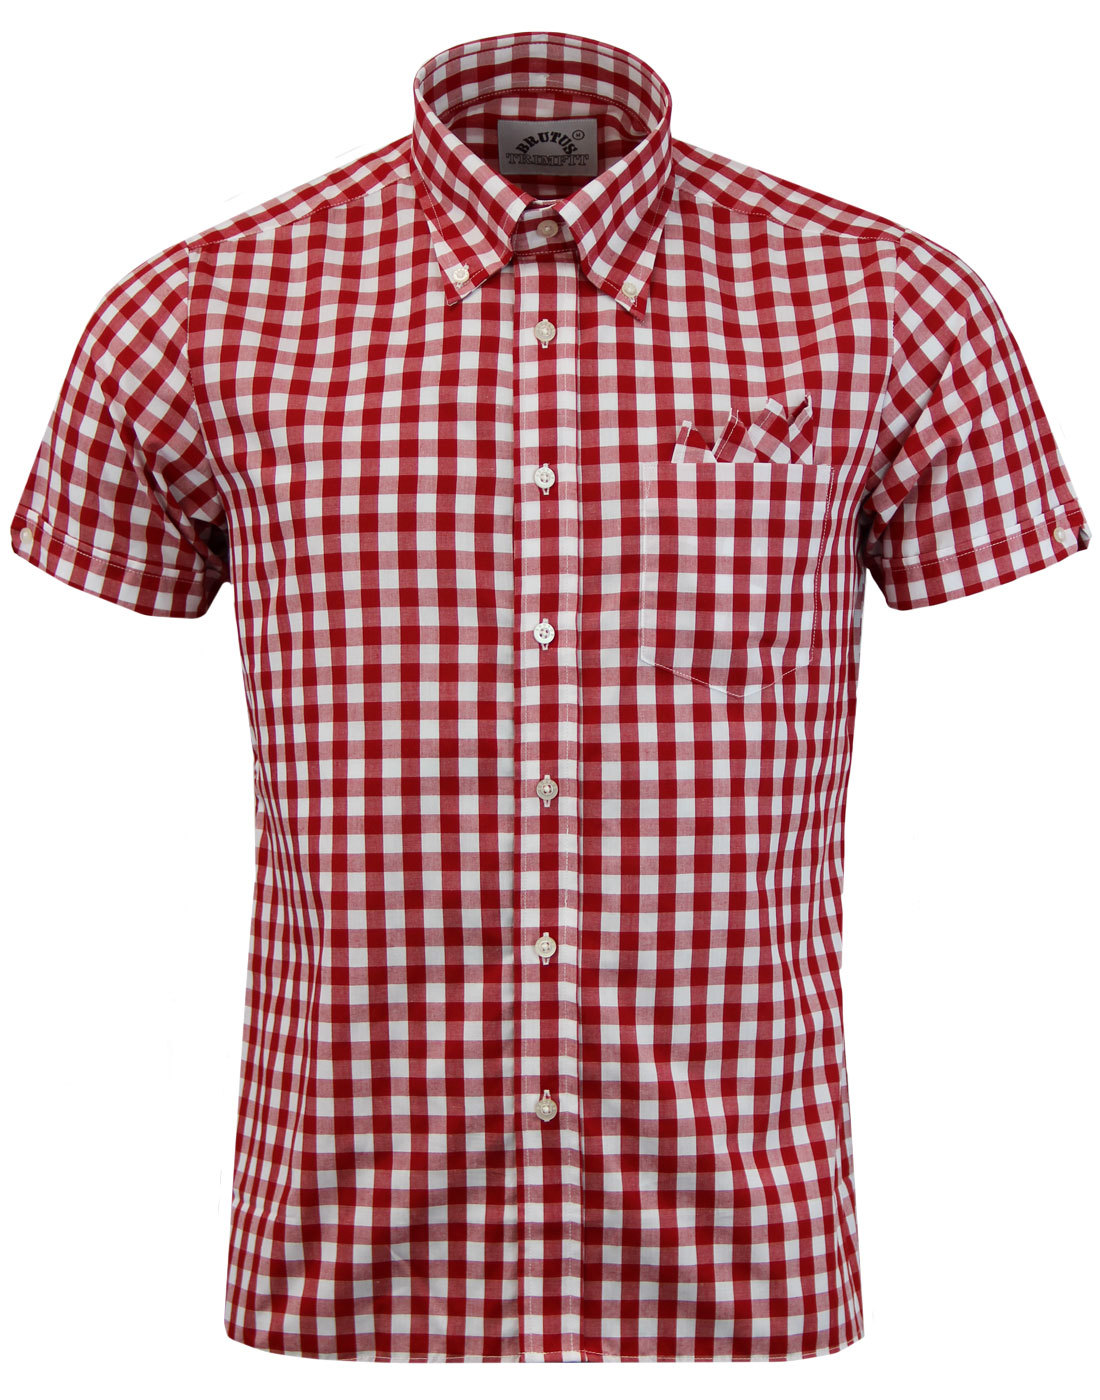 BRUTUS TRIMFIT Mod Button Down Large Gingham Check Shirt in Red